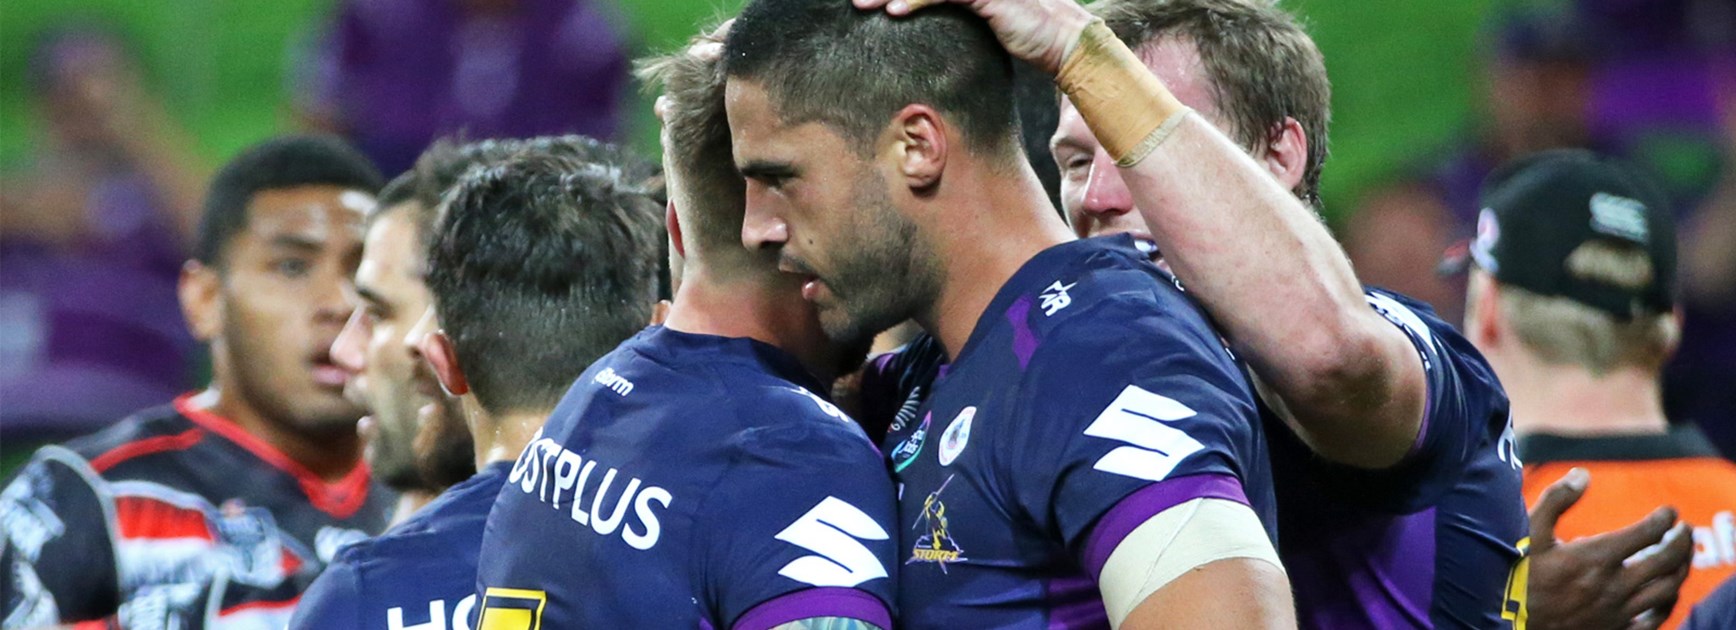 The Storm celebrate Jesse Bromwich's first-half try against the Warriors on Monday night.